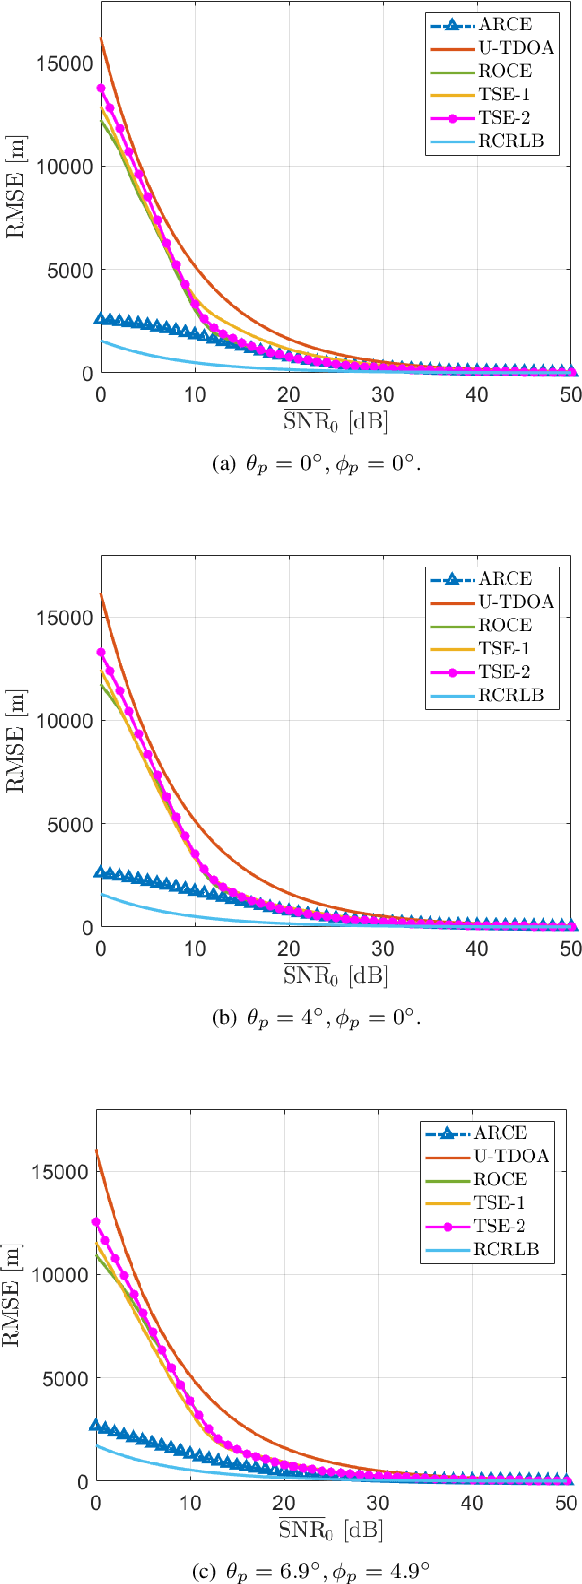 Figure 4 for Enhanced Target Localization with Deployable Multiplatform Radar Nodes Based on Non-Convex Constrained Least Squares Optimization